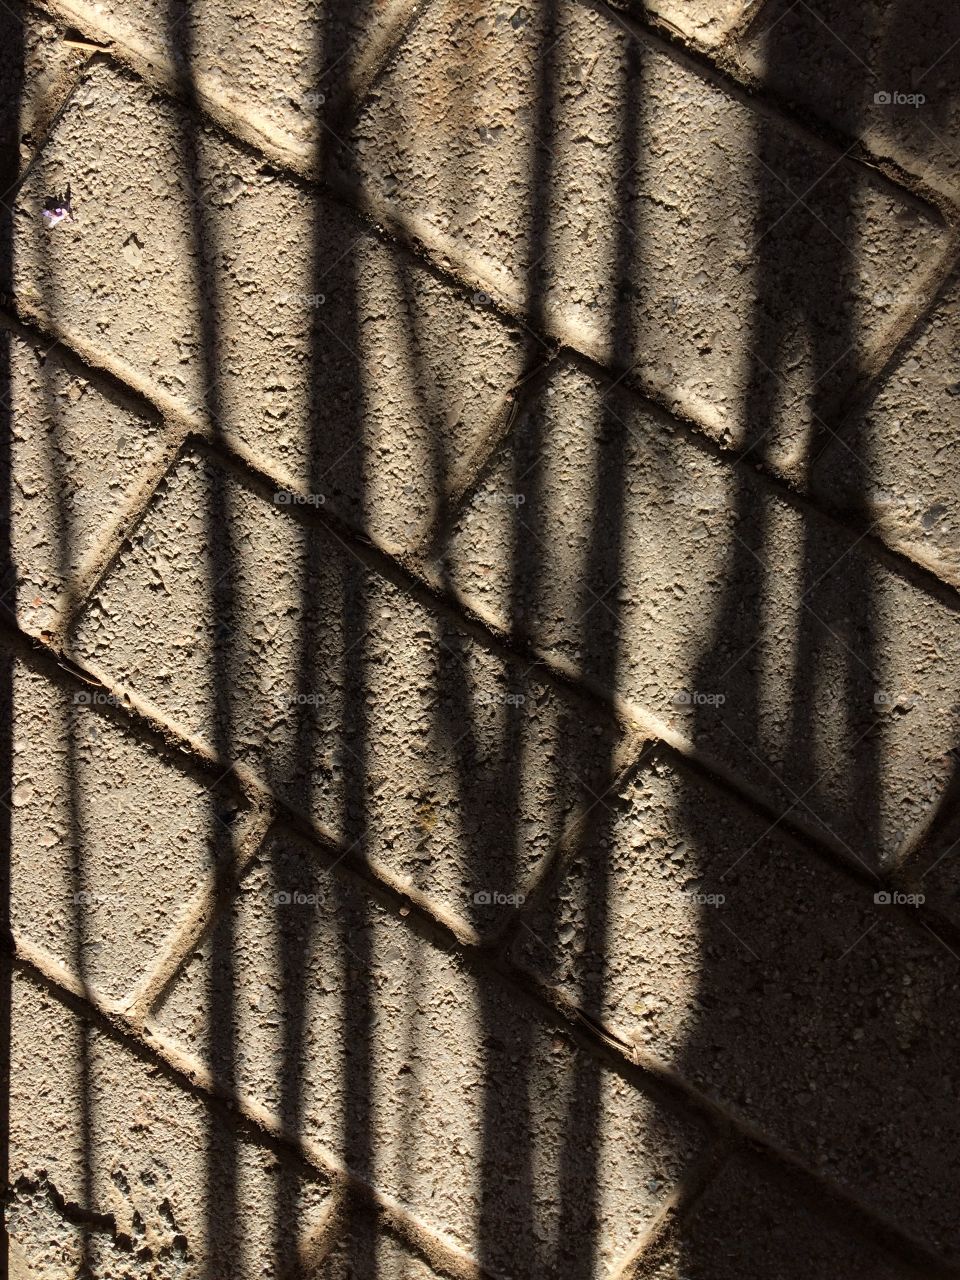 Chasing shadows in the park
